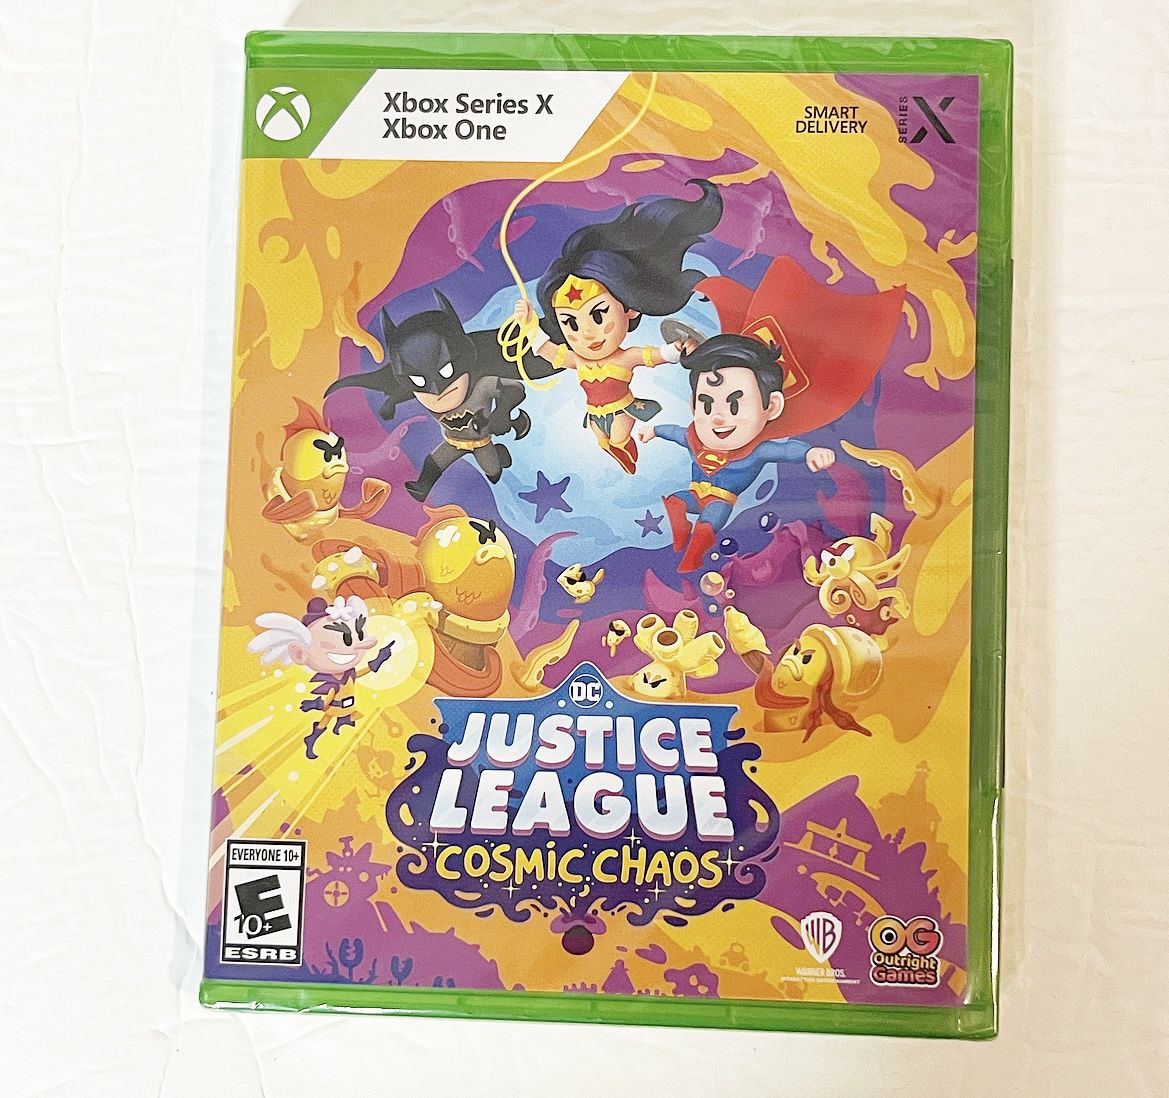 Xbox One/X  DC's Justice League: Cosmic Chaos (Xbox Series X & Xbox One)